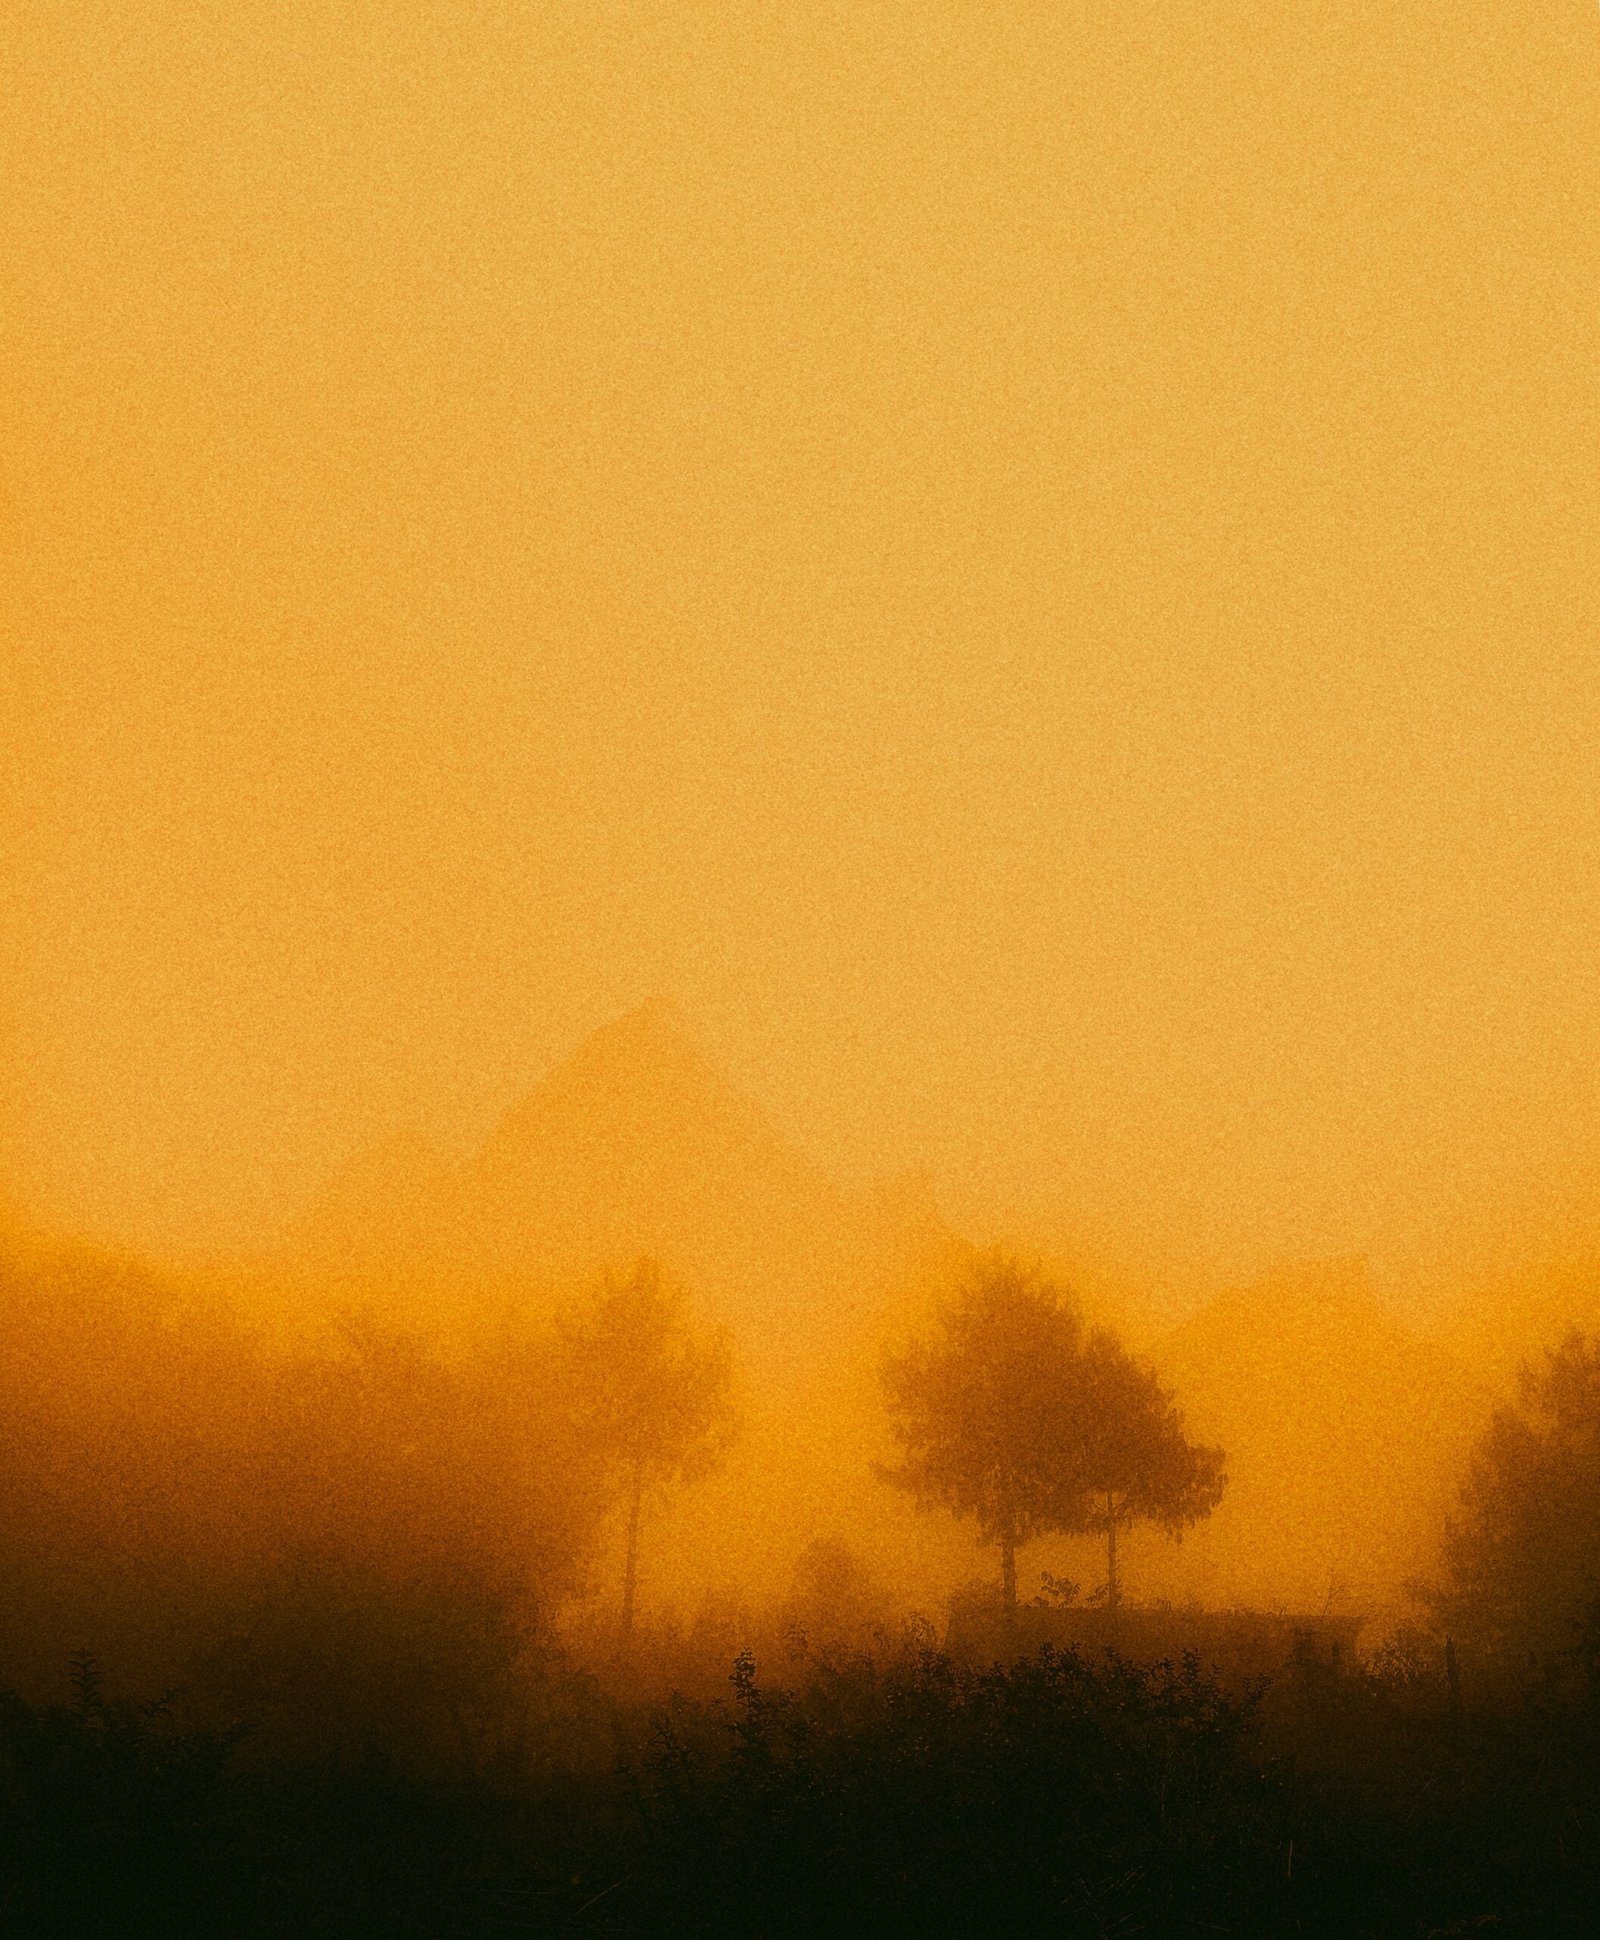 A sandstorm by the pyramids of giza